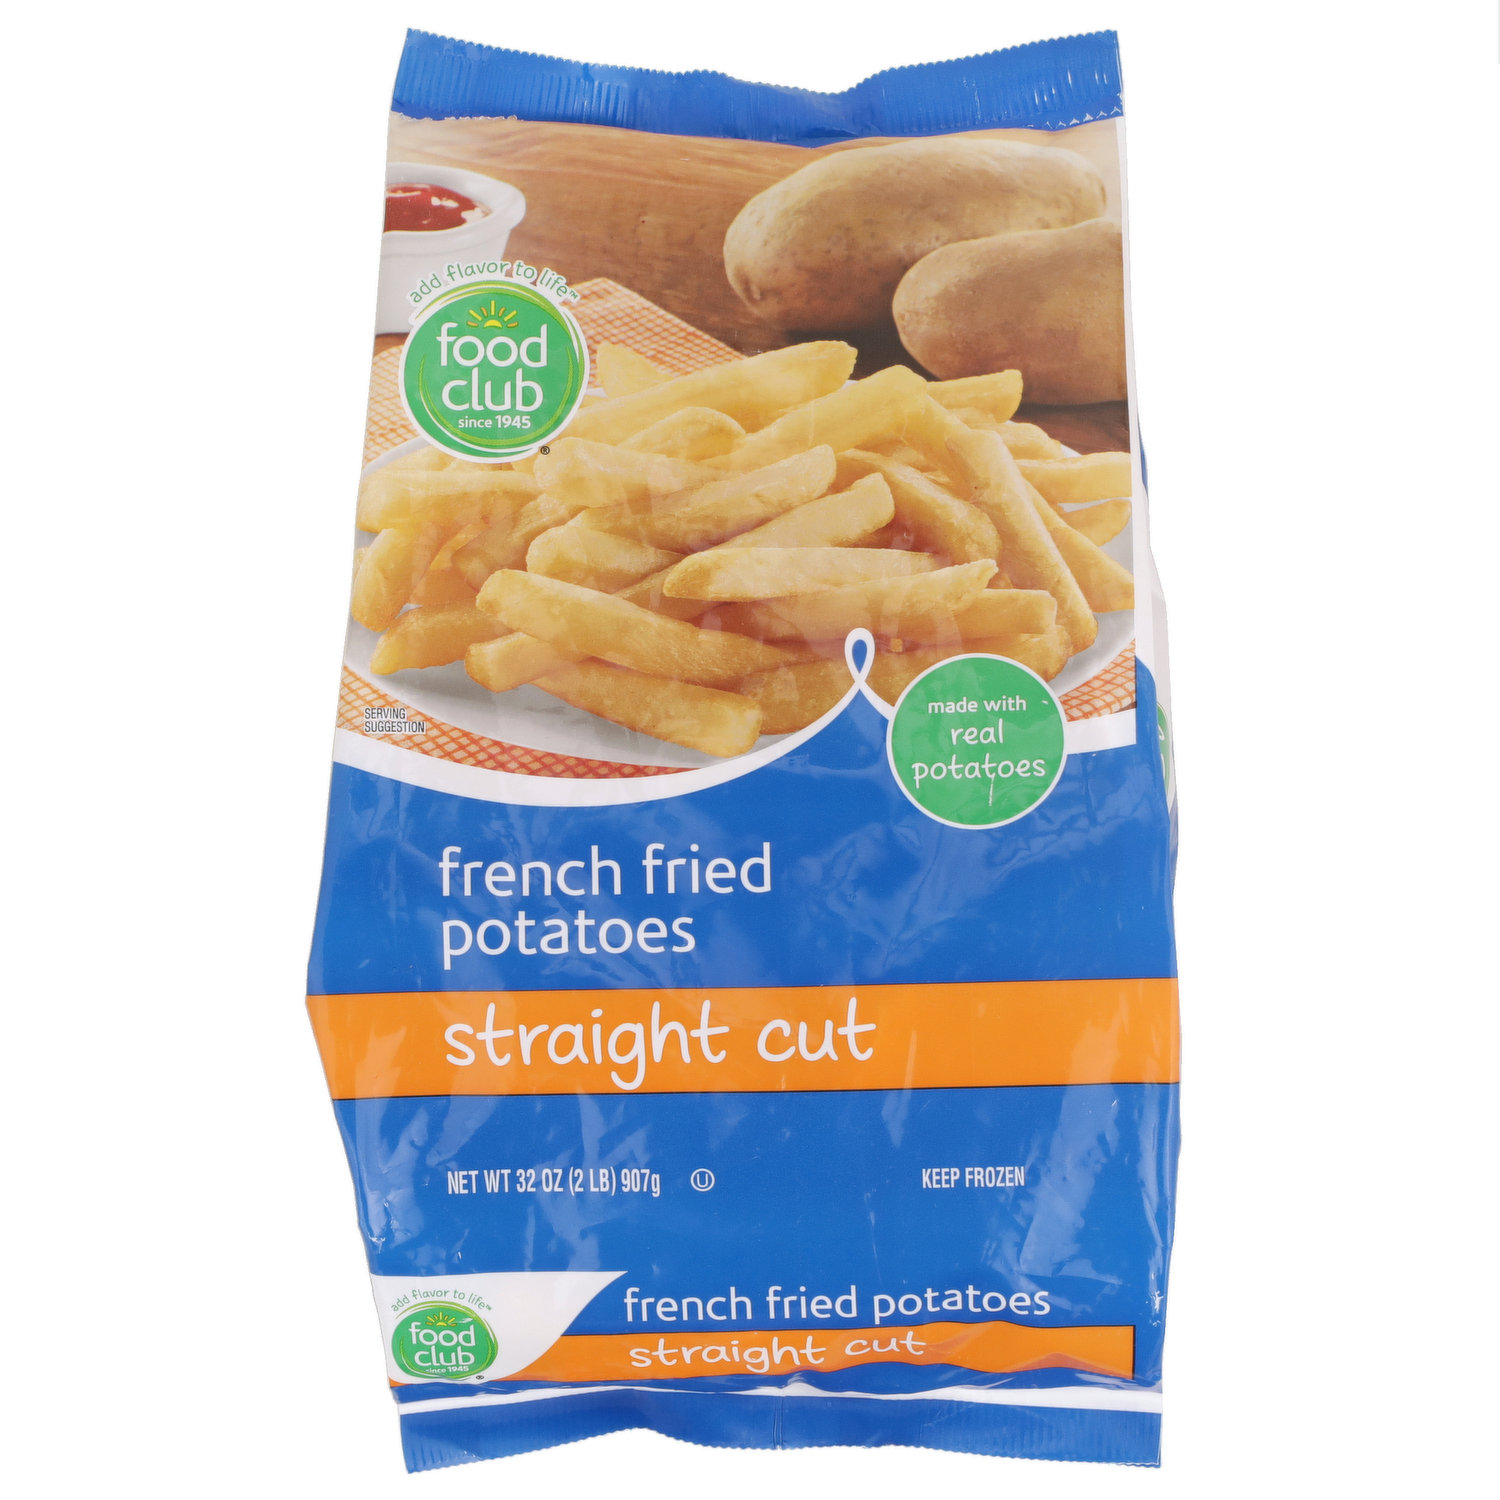 Organic Shoestring French Fries (No Added Salt), 16 oz at Whole